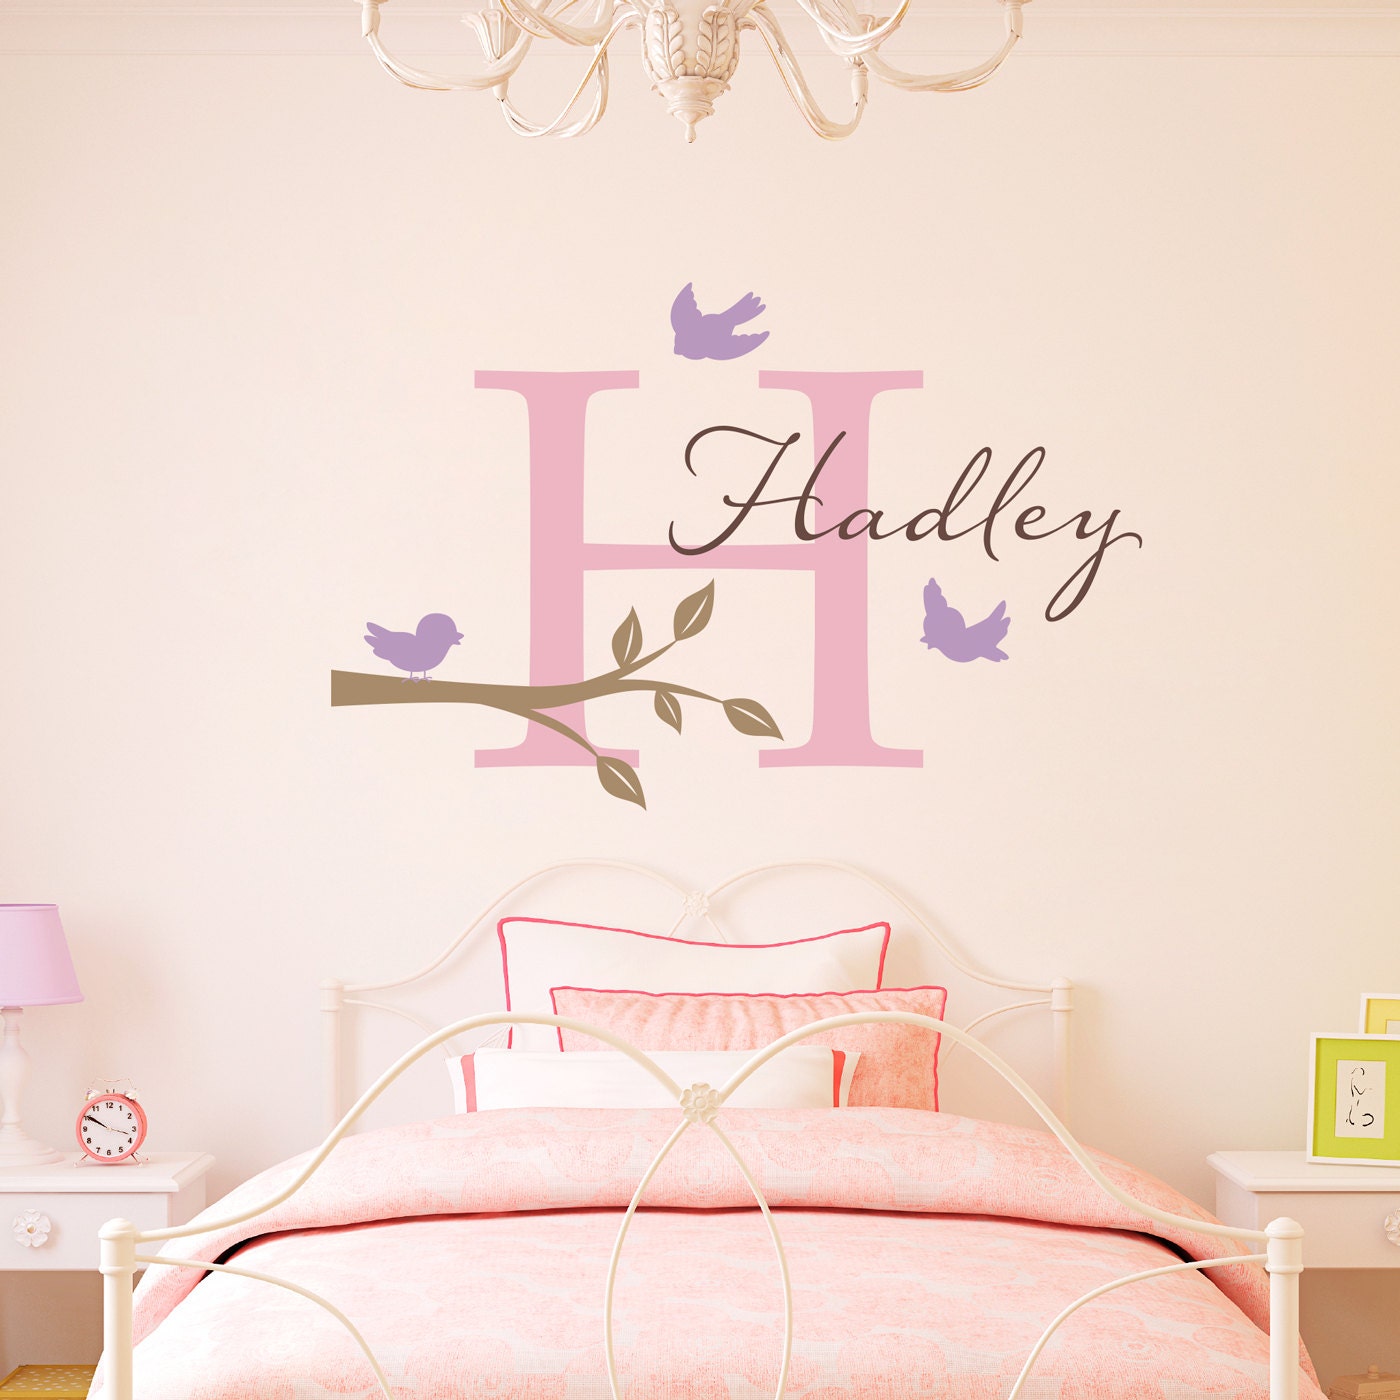 Initial & Name Decal with Birds and Branch - Bird Wall Decal - Personalized Girls Name Decal - Large